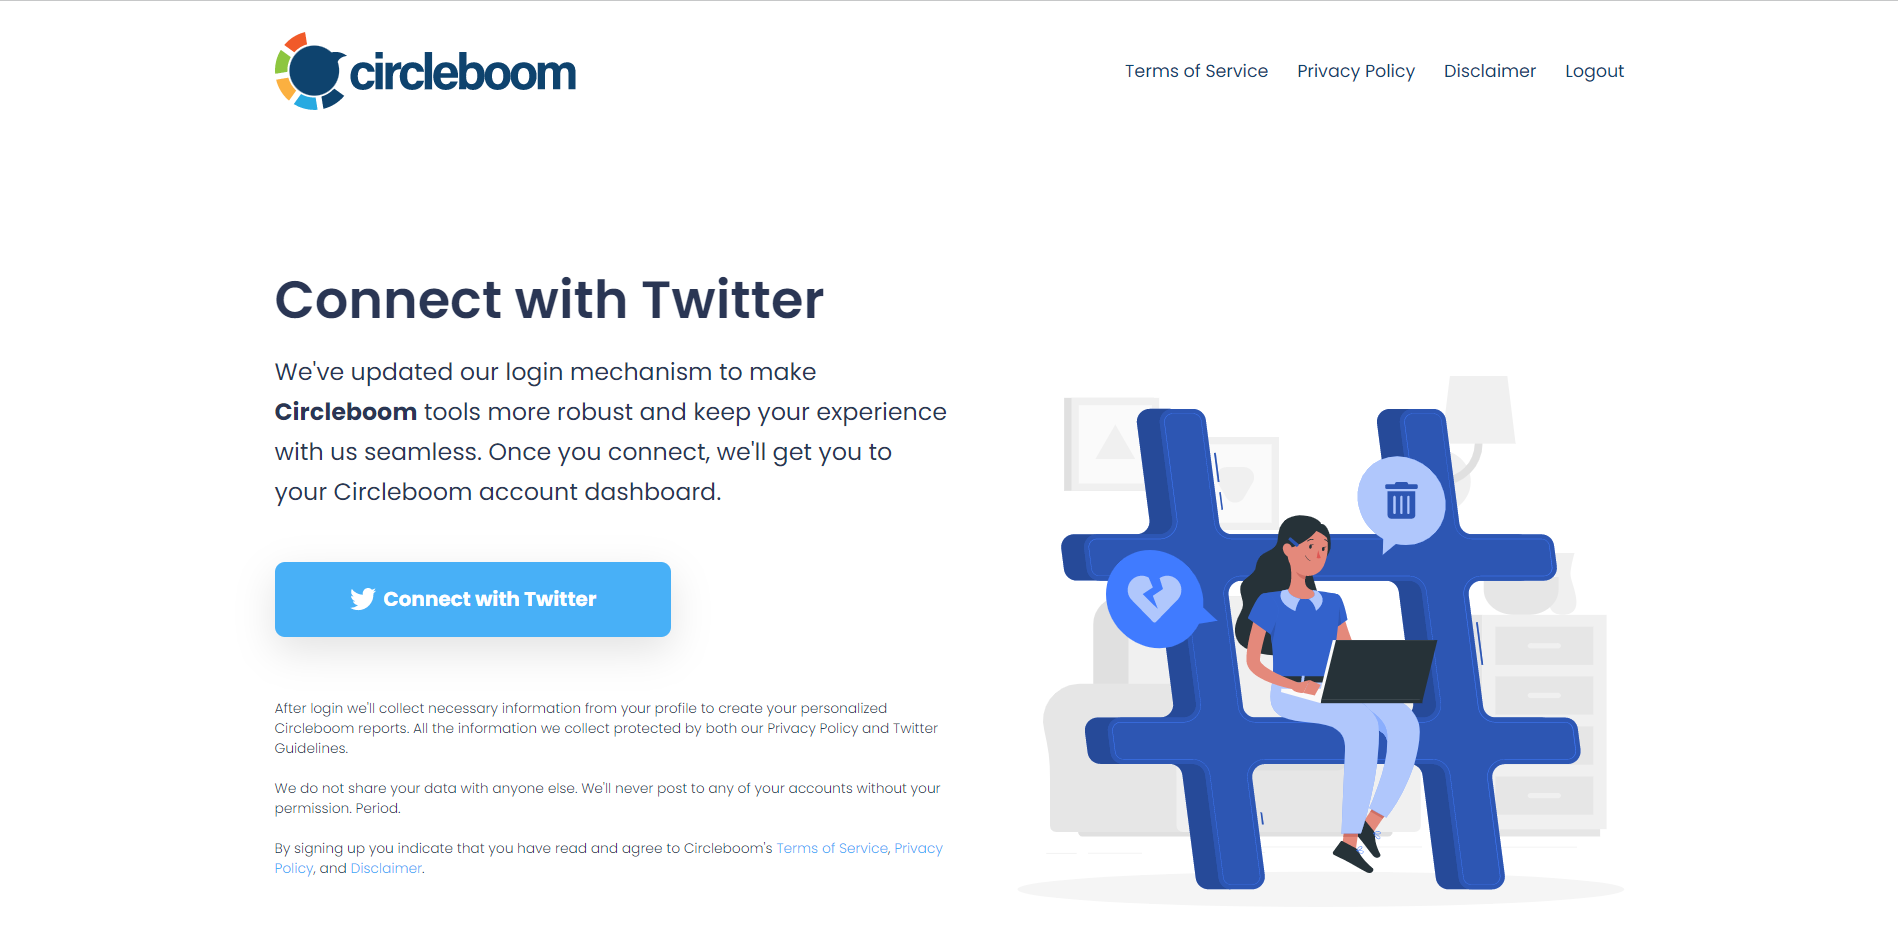 Having difficulty checking your Twitter followers? You can quickly check Twitter followers on Circleboom Twitter.